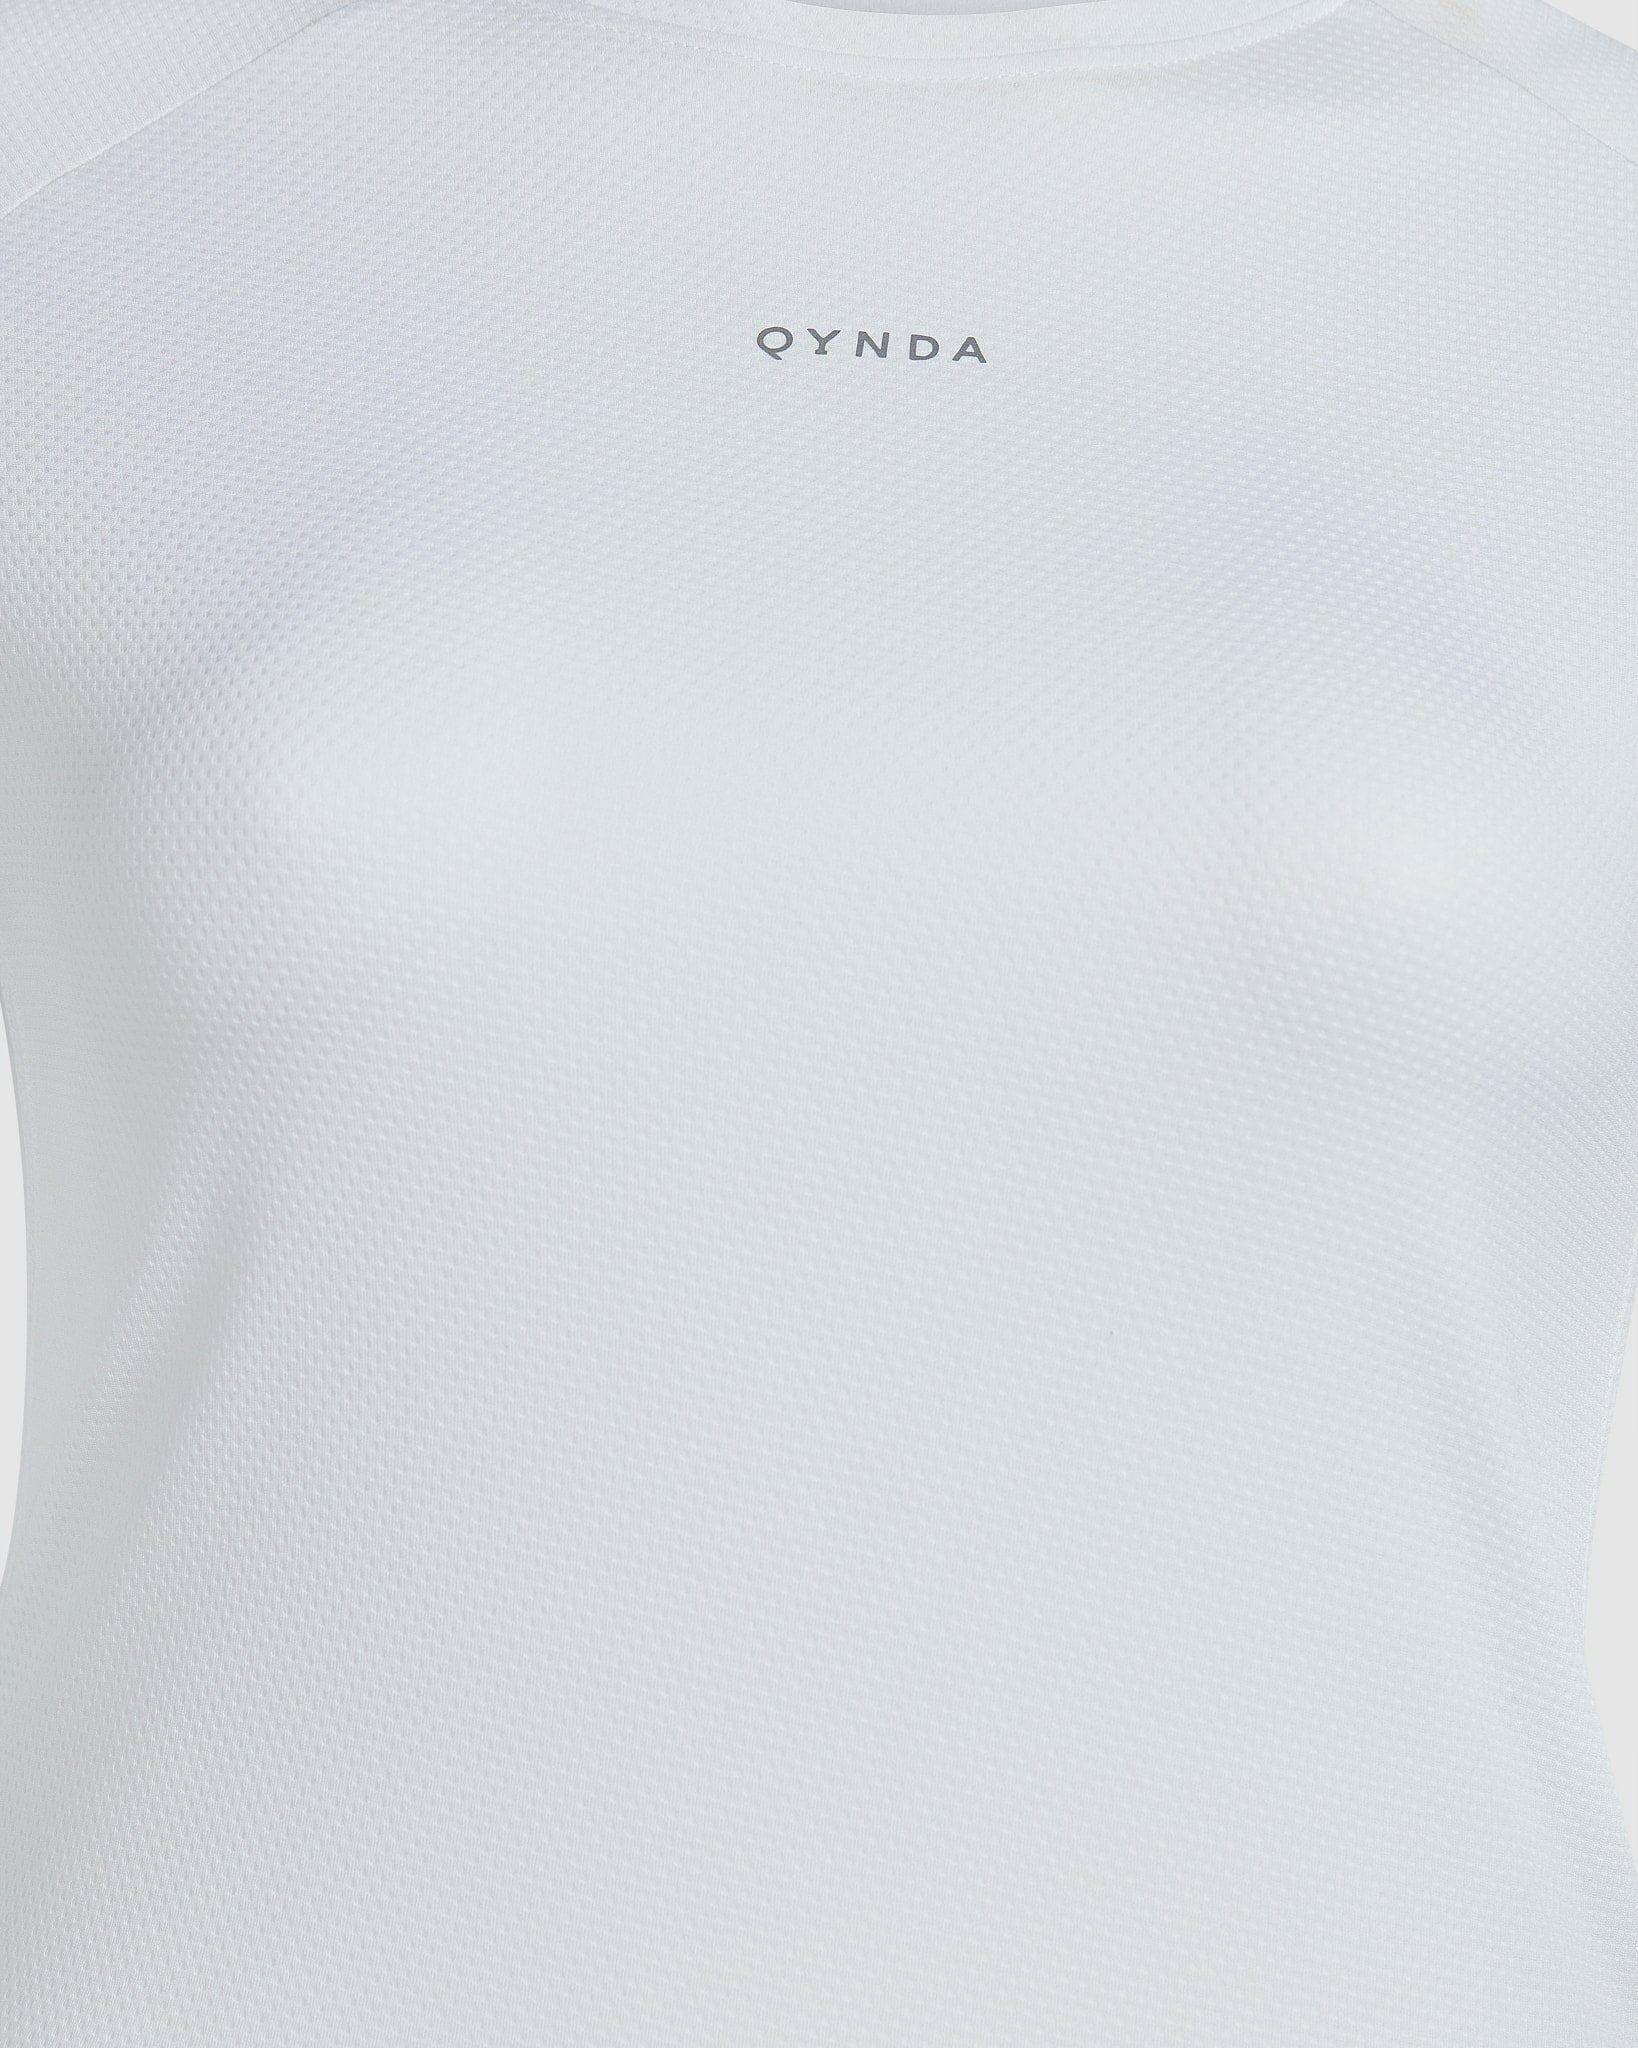 Close-up of a white short sleeve t-shirt designed for running sports, with a textured fabric enhancing breathability and the brand name "qynda" printed at the chest area.